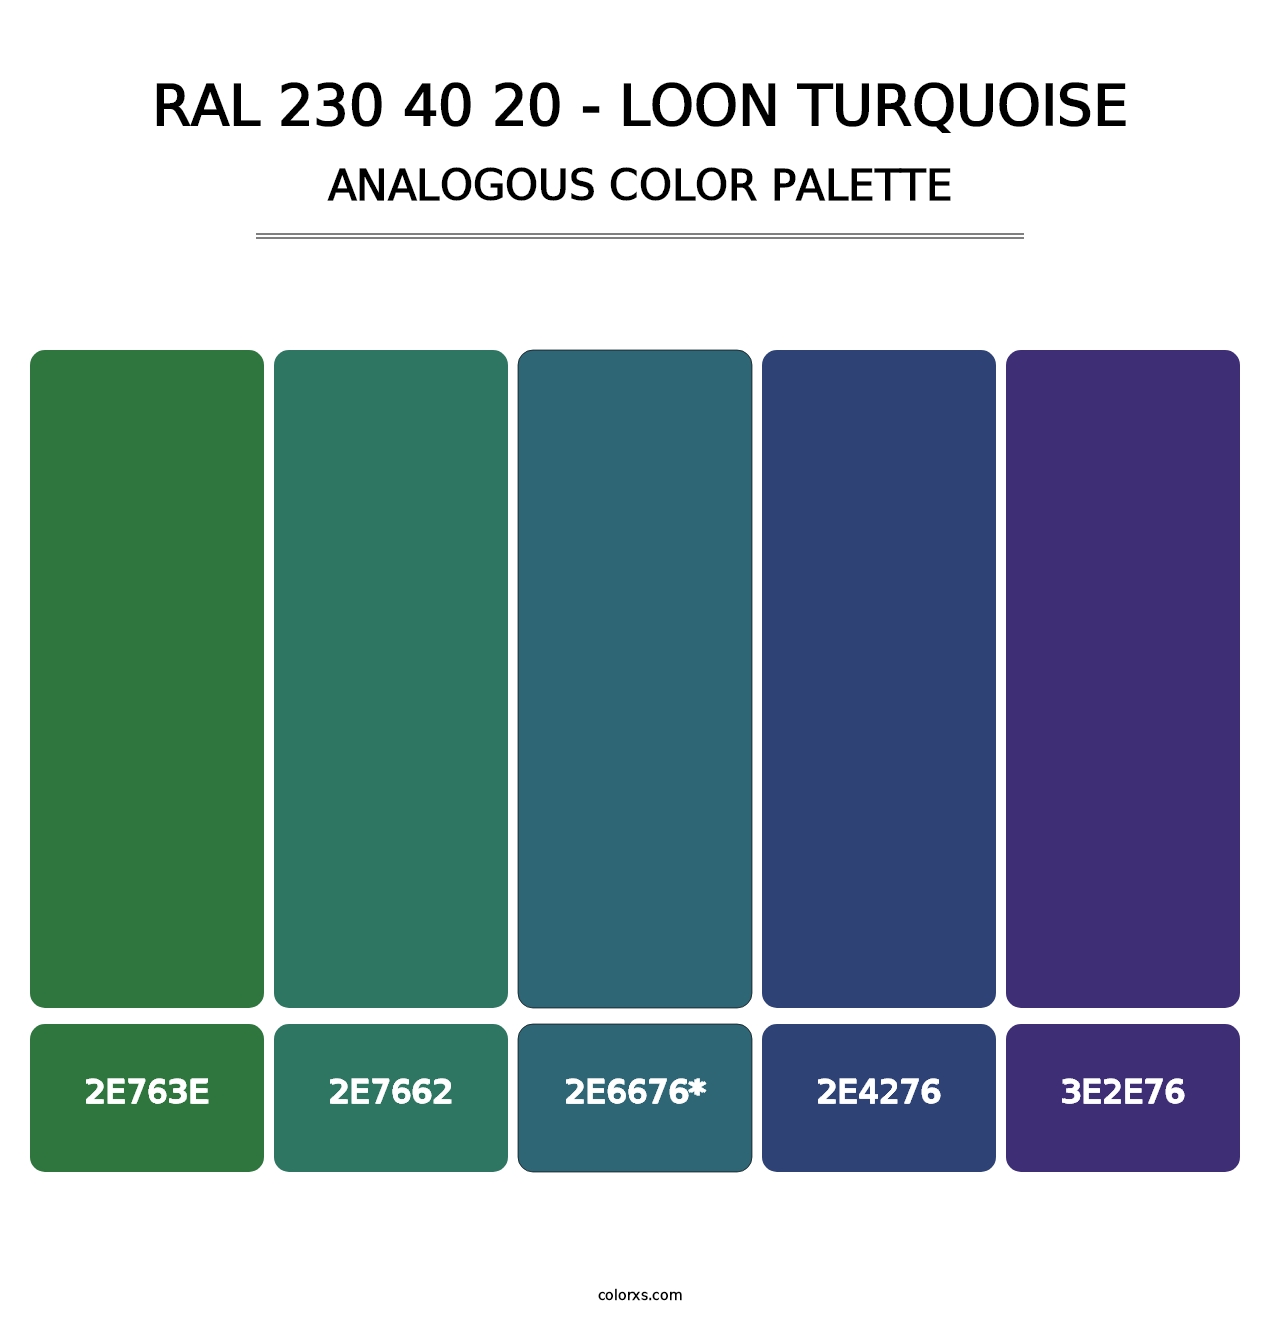 RAL 230 40 20 - Loon Turquoise - Analogous Color Palette